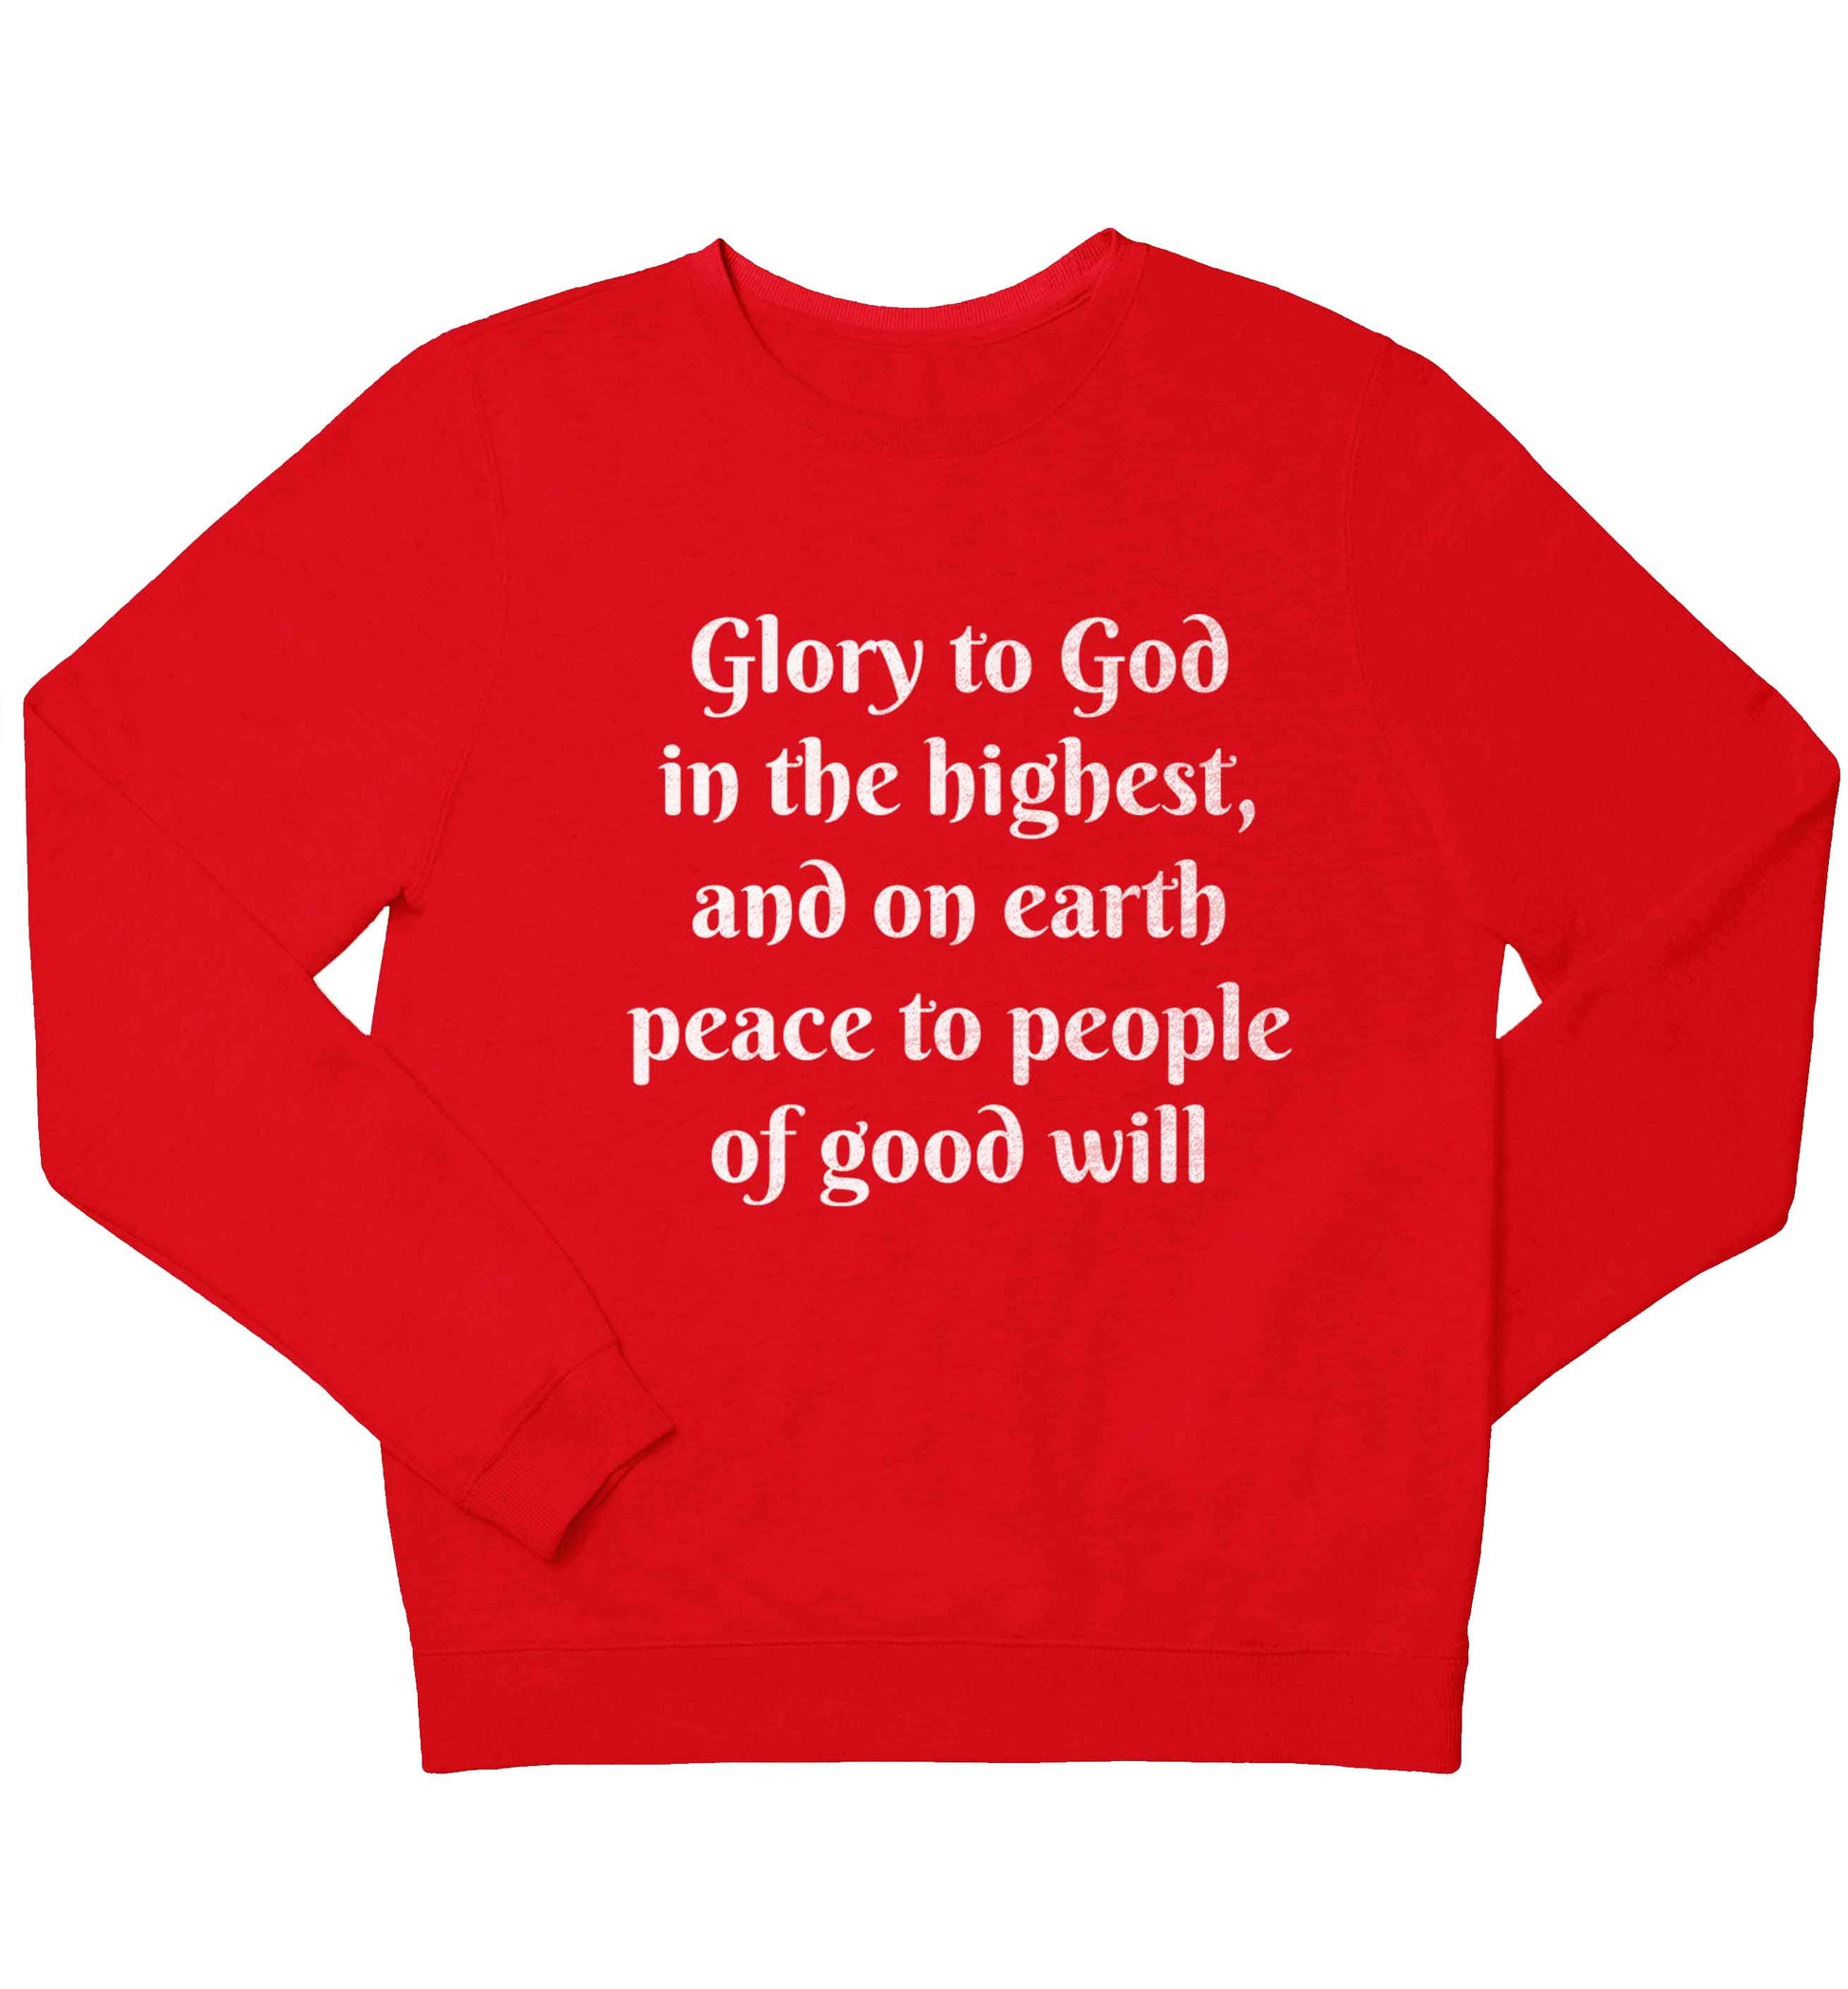 Glory to God in the highest, and on earth peace to people of good will children's grey sweater 12-13 Years